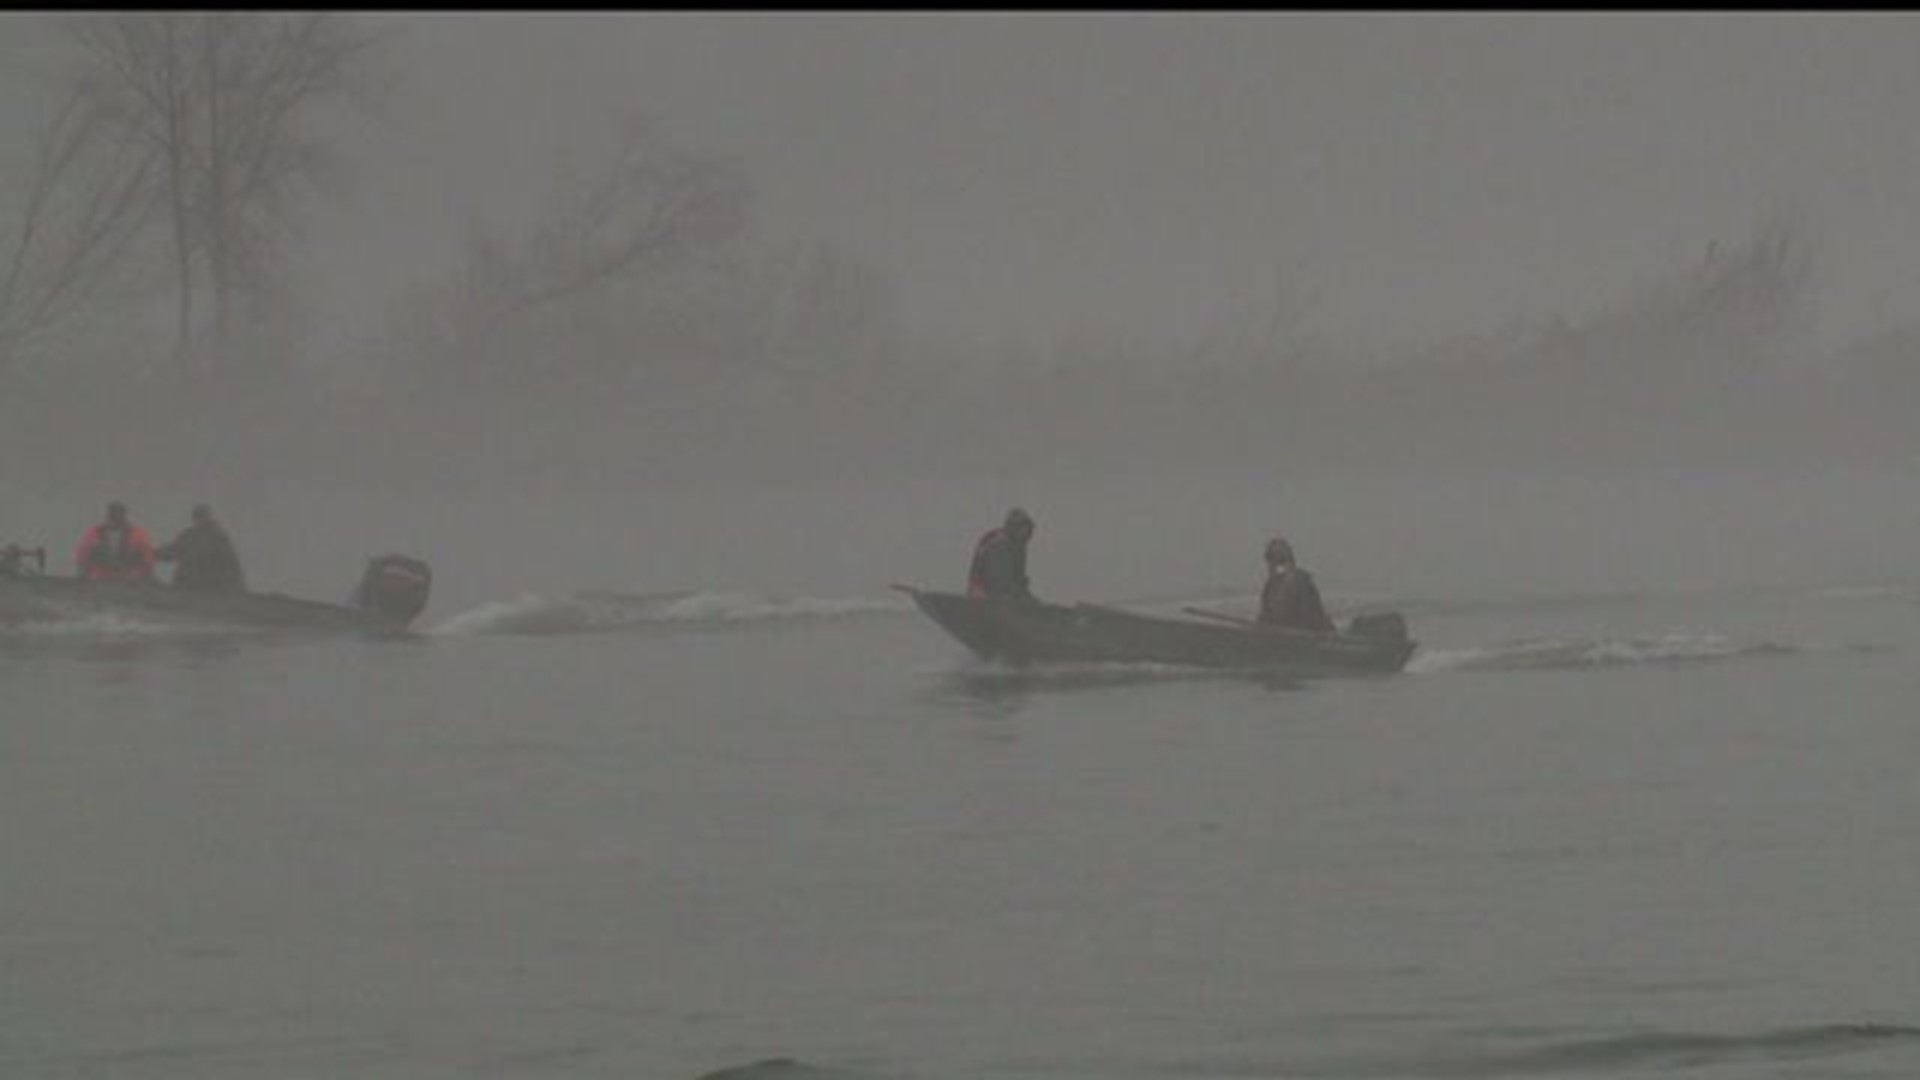 One week later and the search continues for missing hunter along Susquehanna River